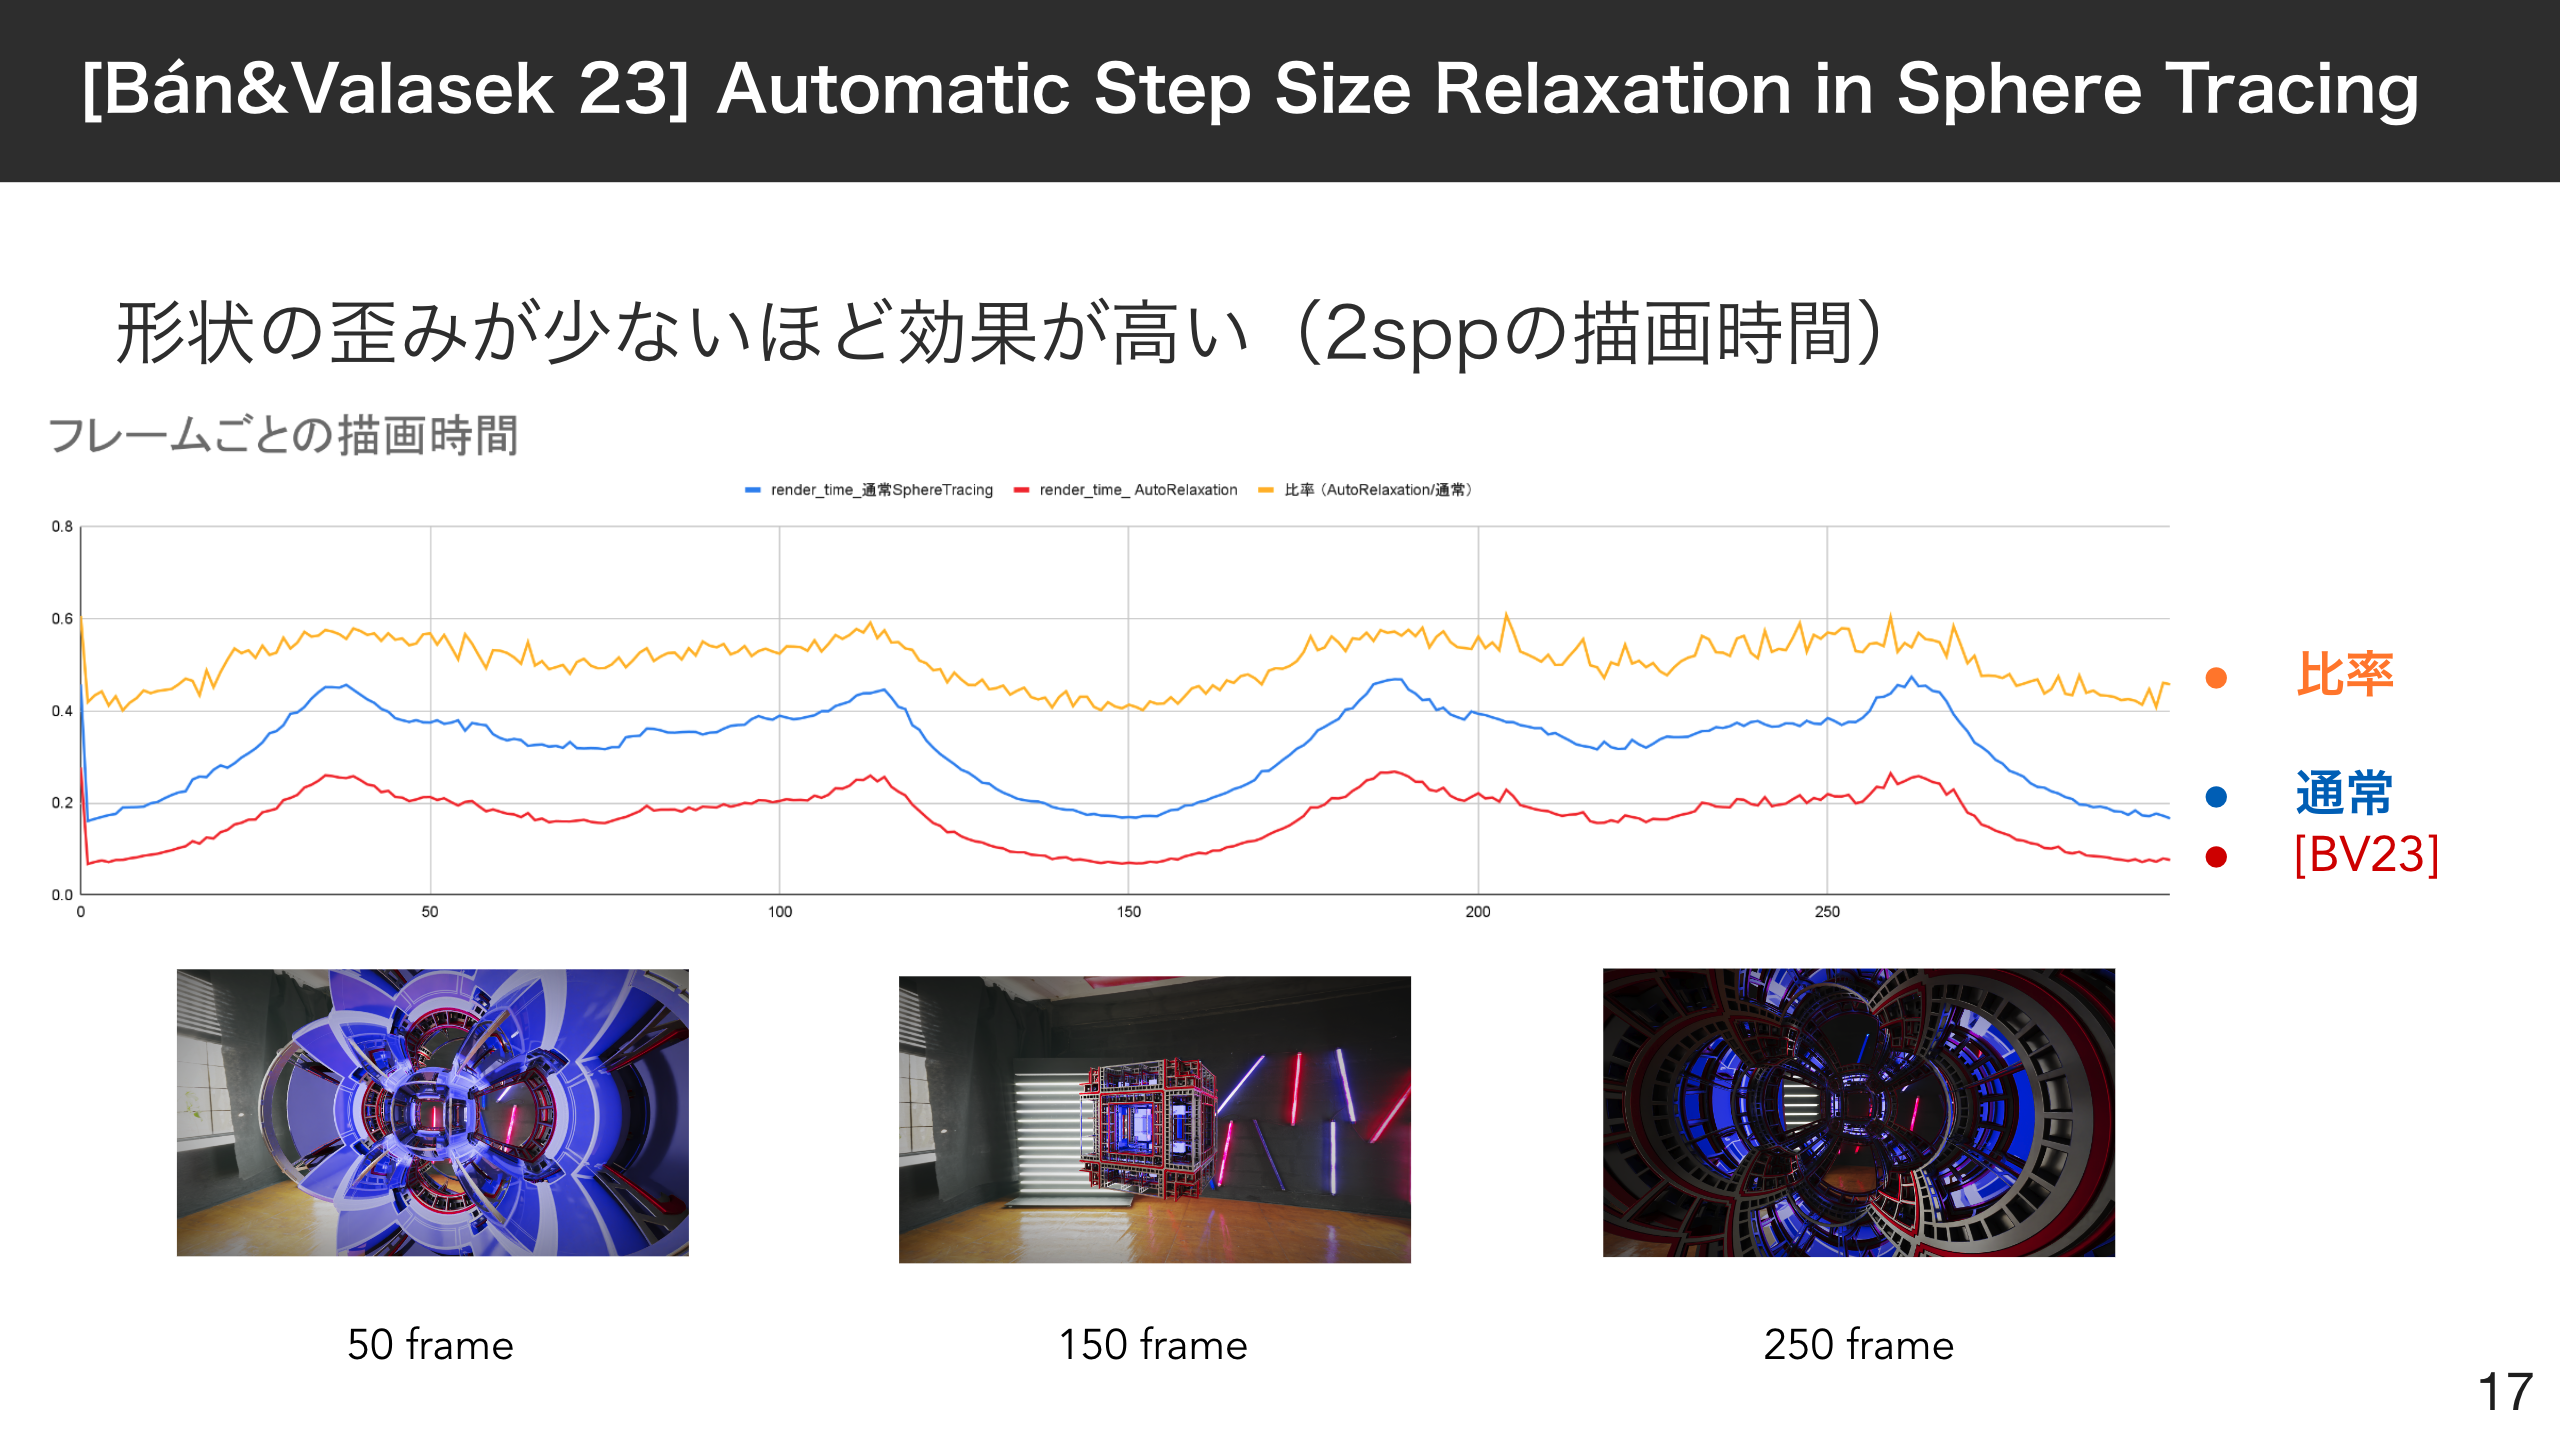 [Bán&Valasek 23] Automatic Step Size Relaxation in Sphere Tracingの結果 時間ごと